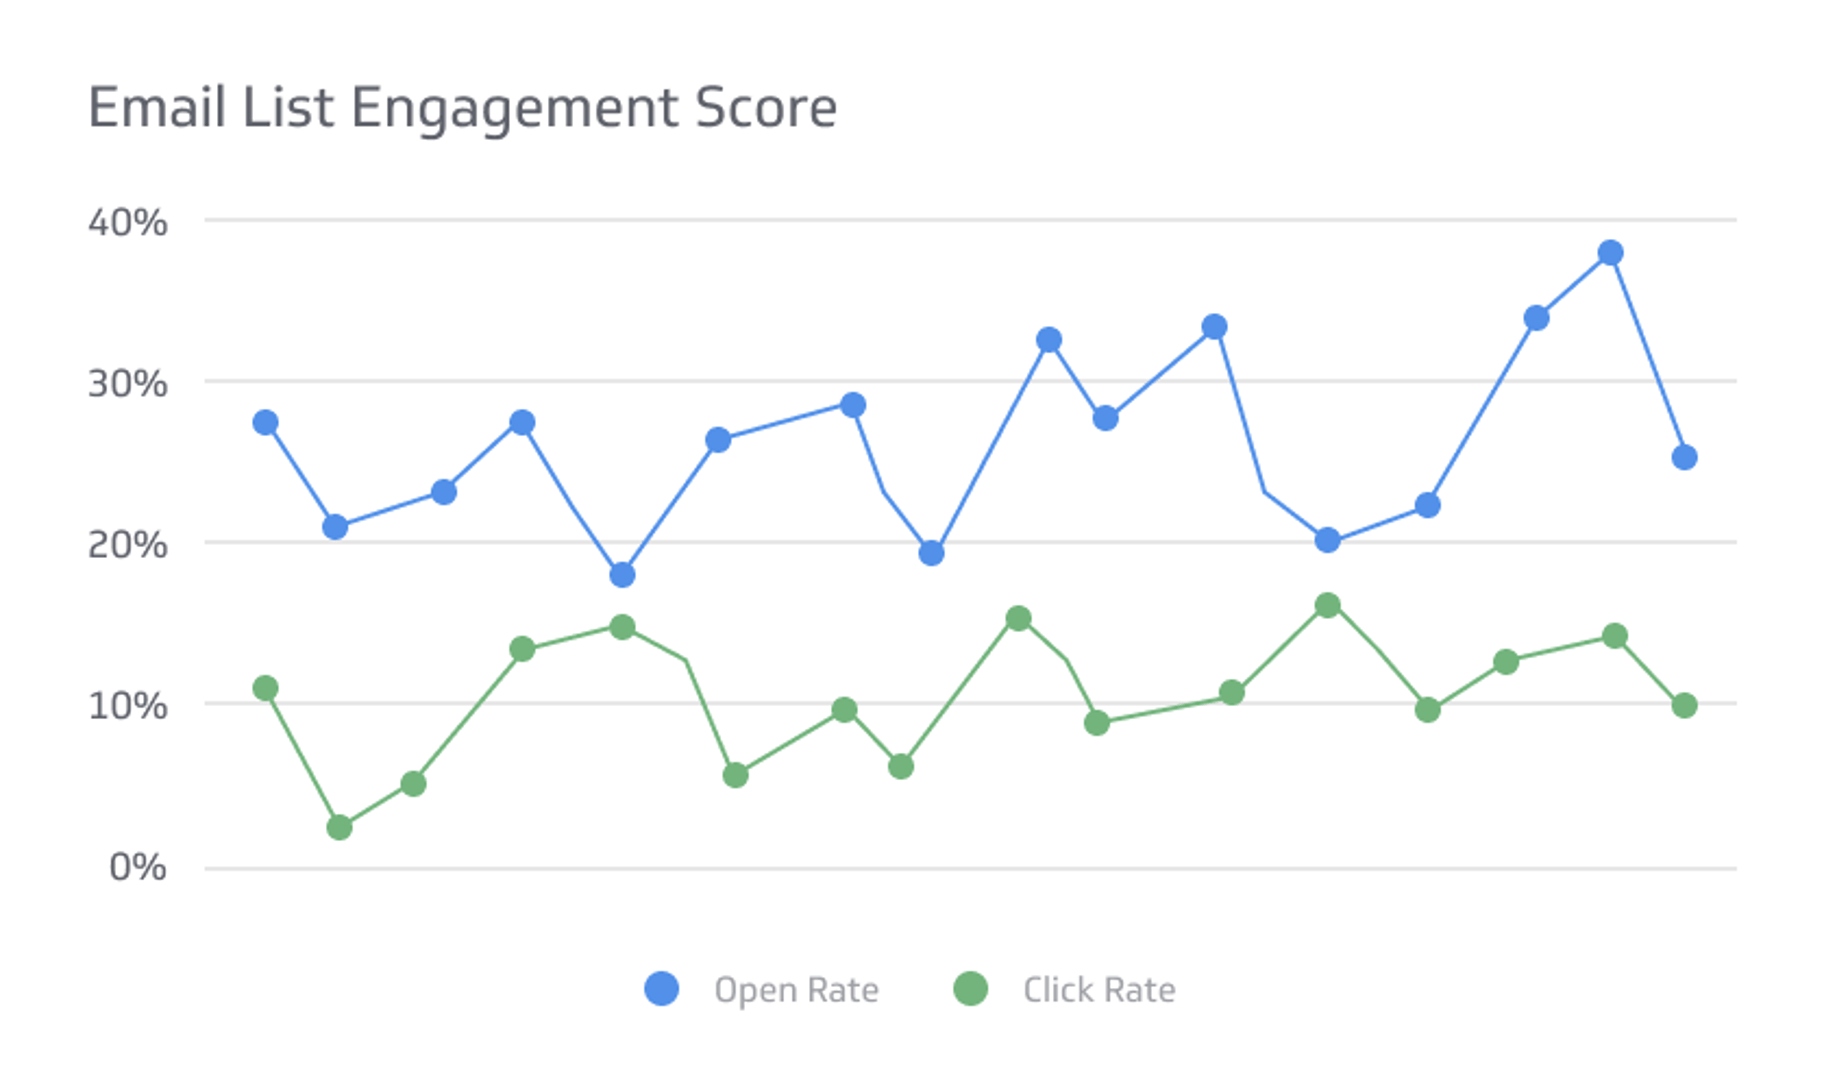 Related KPI Examples - Email Marketing Engagement Score Metric